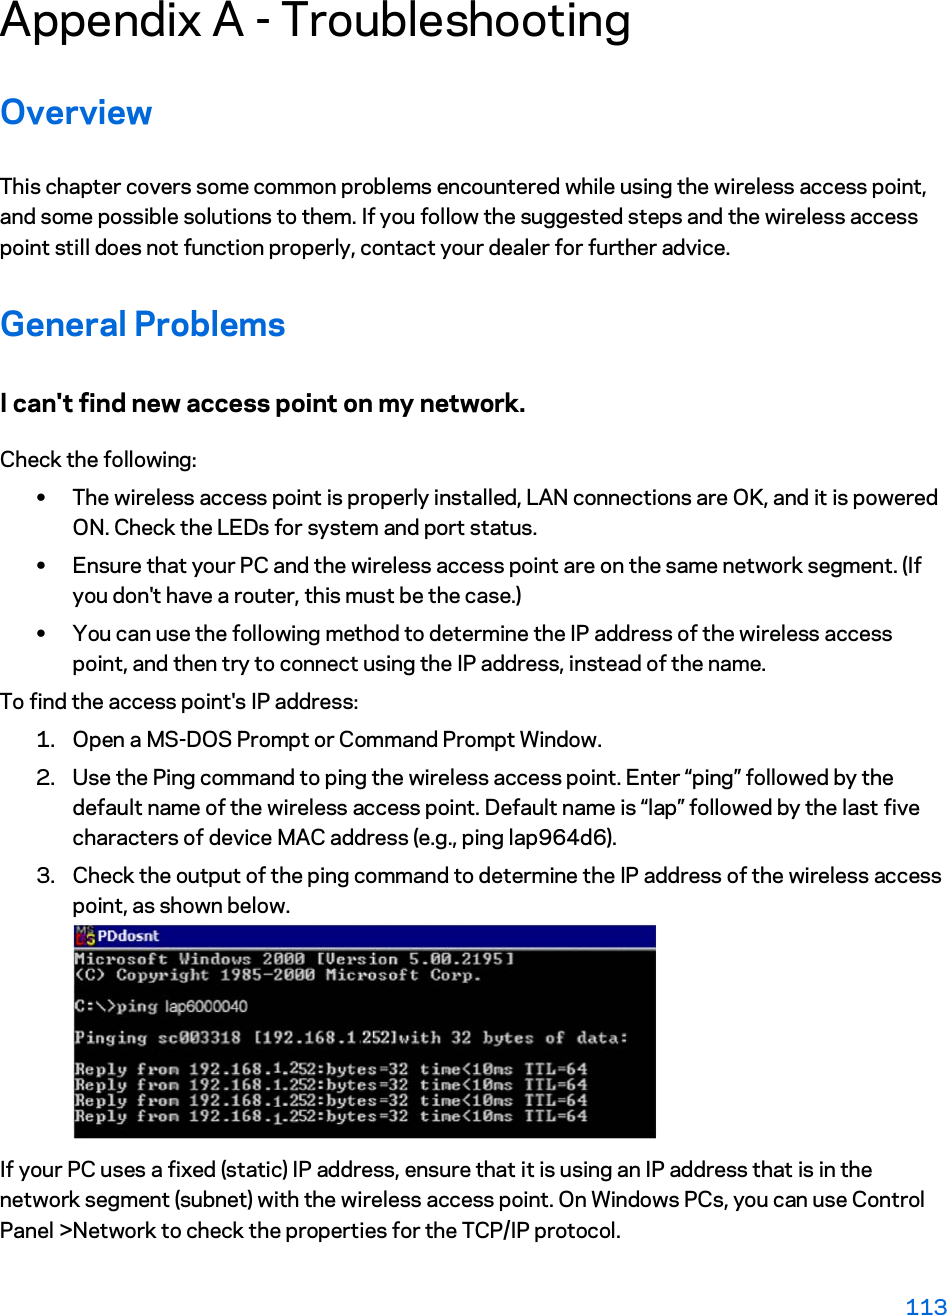 Appendix A - Troubleshooting Overview This chapter covers some common problems encountered while using the wireless access point, and some possible solutions to them. If you follow the suggested steps and the wireless access point still does not function properly, contact your dealer for further advice. General Problems I can&apos;t find new access point on my network. Check the following: xThe wireless access point is properly installed, LAN connections are OK, and it is powered ON. Check the LEDs for system and port status. xEnsure that your PC and the wireless access point are on the same network segment. (If you don&apos;t have a router, this must be the case.)  xYou can use the following method to determine the IP address of the wireless access point, and then try to connect using the IP address, instead of the name. To find the access point&apos;s IP address: 1. Open a MS-DOS Prompt or Command Prompt Window. 2. Use the Ping command to ping the wireless access point. Enter “ping” followed by the default name of the wireless access point. Default name is “lap” followed by the last five characters of device MAC address (e.g., ping lap964d6). 3. Check the output of the ping command to determine the IP address of the wireless access point, as shown below. If your PC uses a fixed (static) IP address, ensure that it is using an IP address that is in the network segment (subnet) with the wireless access point. On Windows PCs, you can use Control Panel &gt;Network to check the properties for the TCP/IP protocol. 113